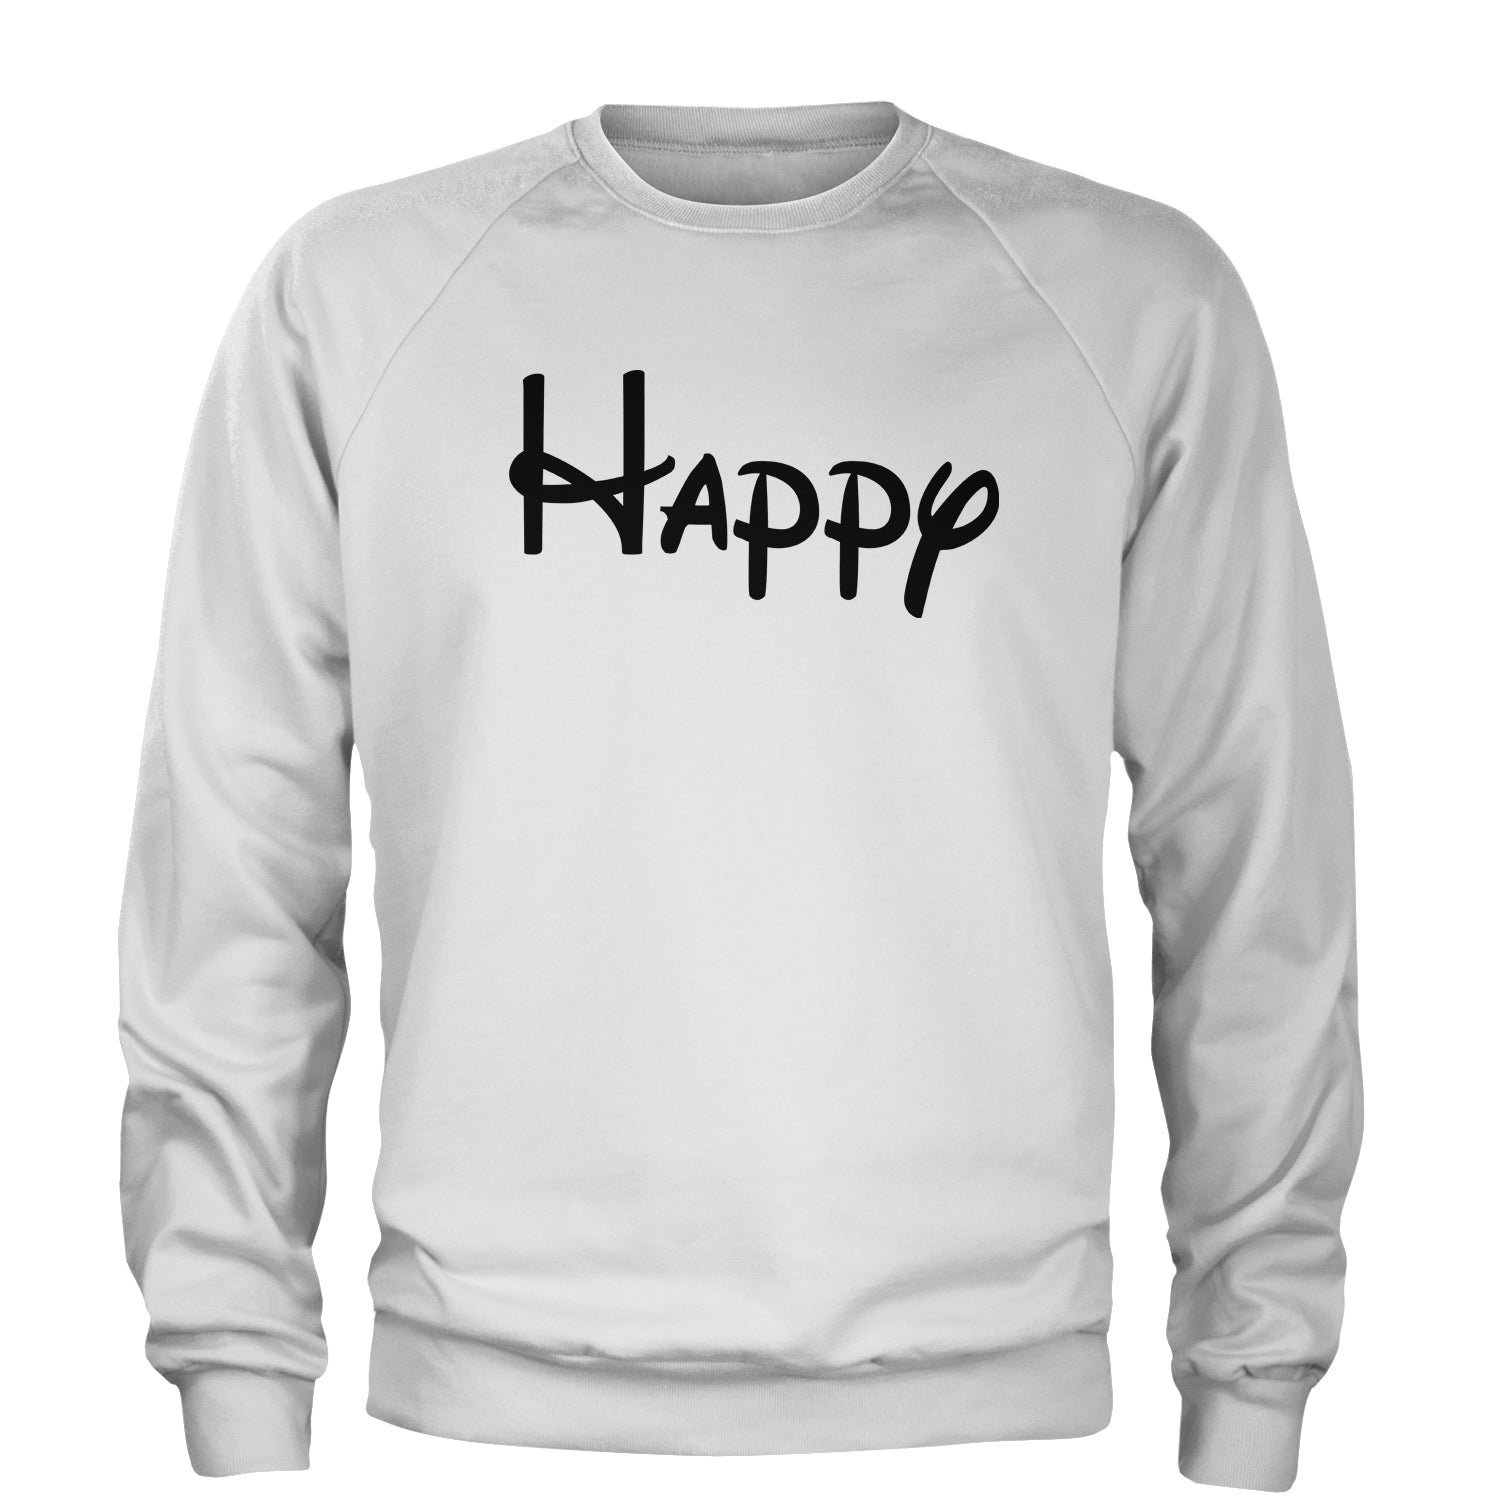 Happy - 7 Dwarfs Costume Adult Crewneck Sweatshirt and, costume, dwarfs, group, halloween, matching, seven, snow, the, white by Expression Tees